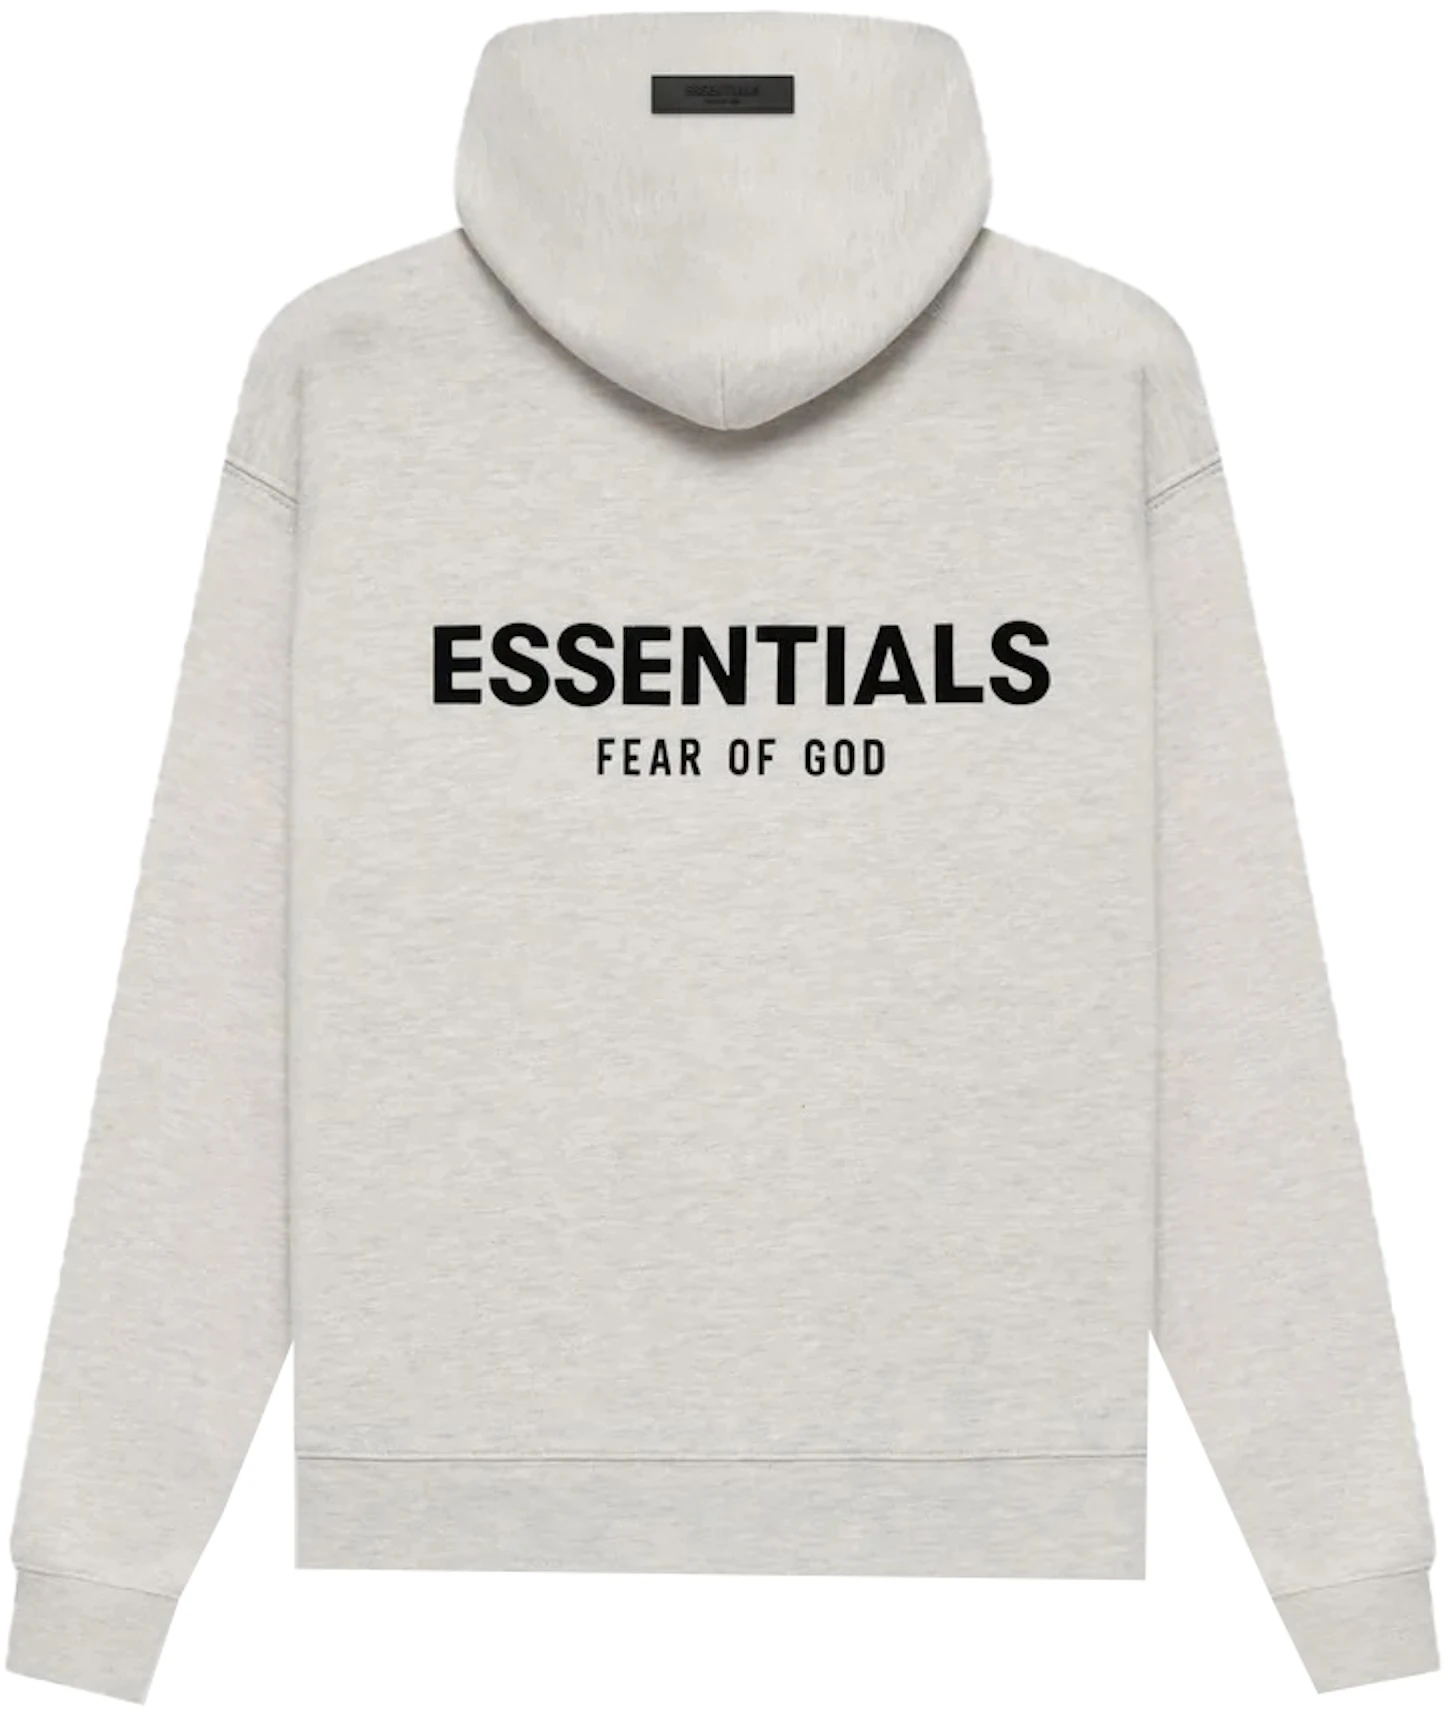 FEAR OF GOD ESSENTIALS 3D Silicon Applique Pullover Hoodie Gray Flannel ...